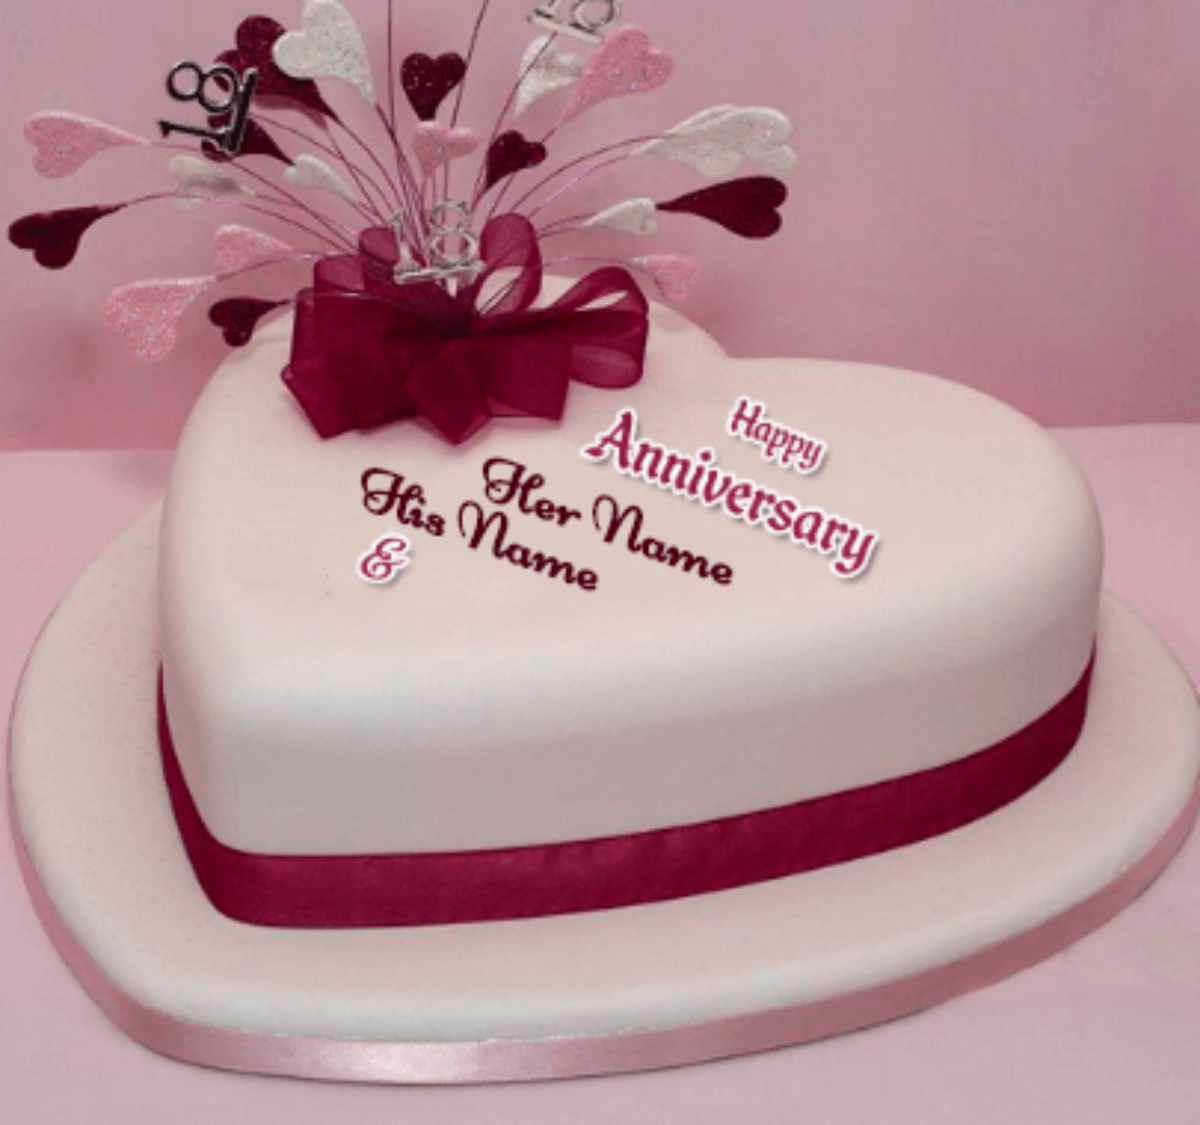 Happy Anniversary Care Cake - Unique Beautiful Cake with Name